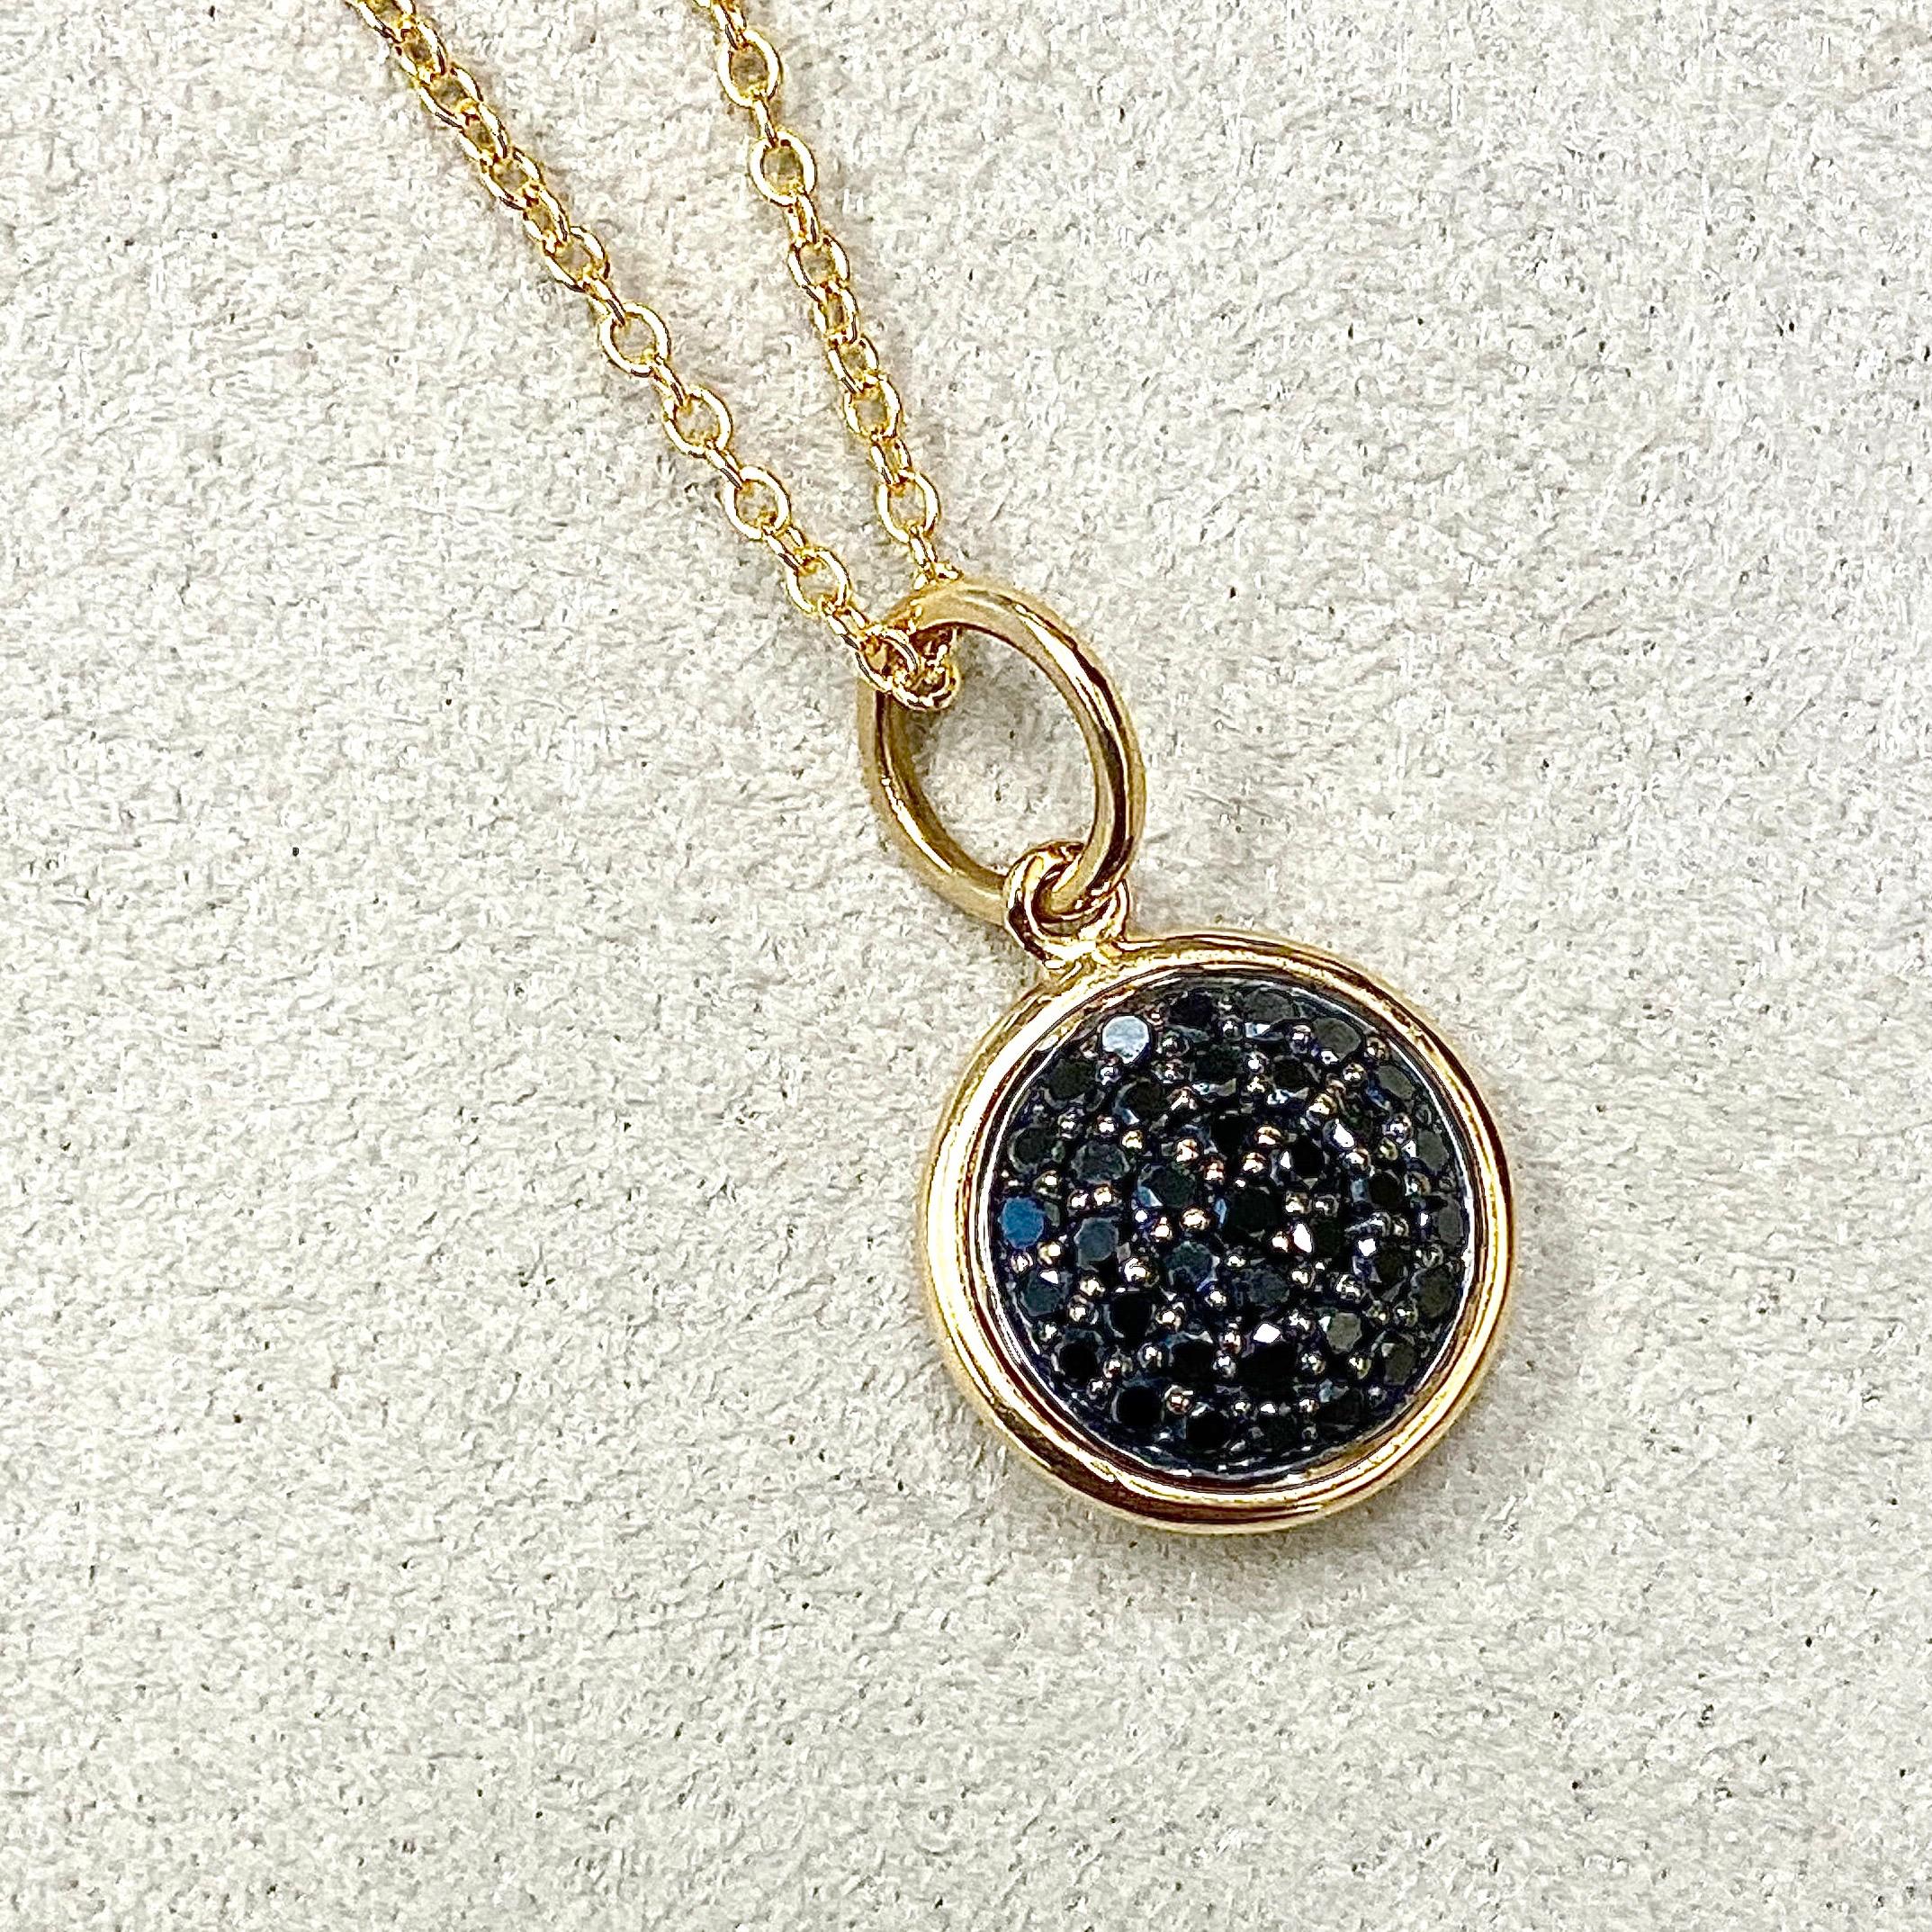 Created in 18k yellow gold
10 mm size charm
Black diamonds 0.30 ct approx
Chain sold separately 

Handcrafted from lustrous 18k yellow gold, this 10mm pendant dazzles with approximately 0.30ct of black diamonds. Chain sold separately.


About the